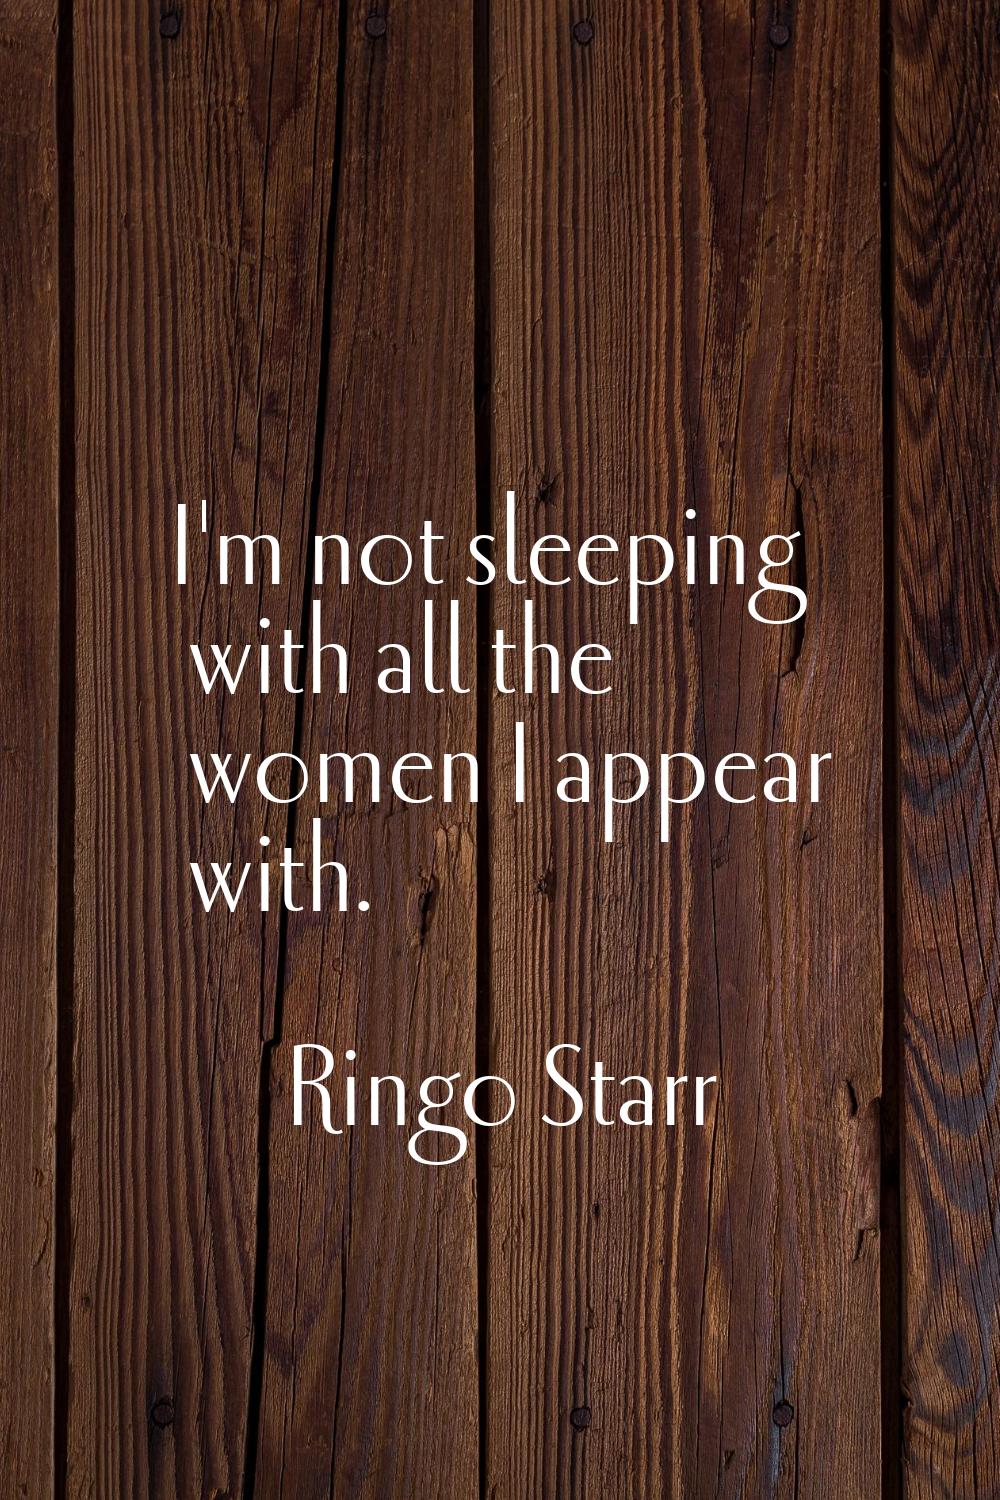 I'm not sleeping with all the women I appear with.